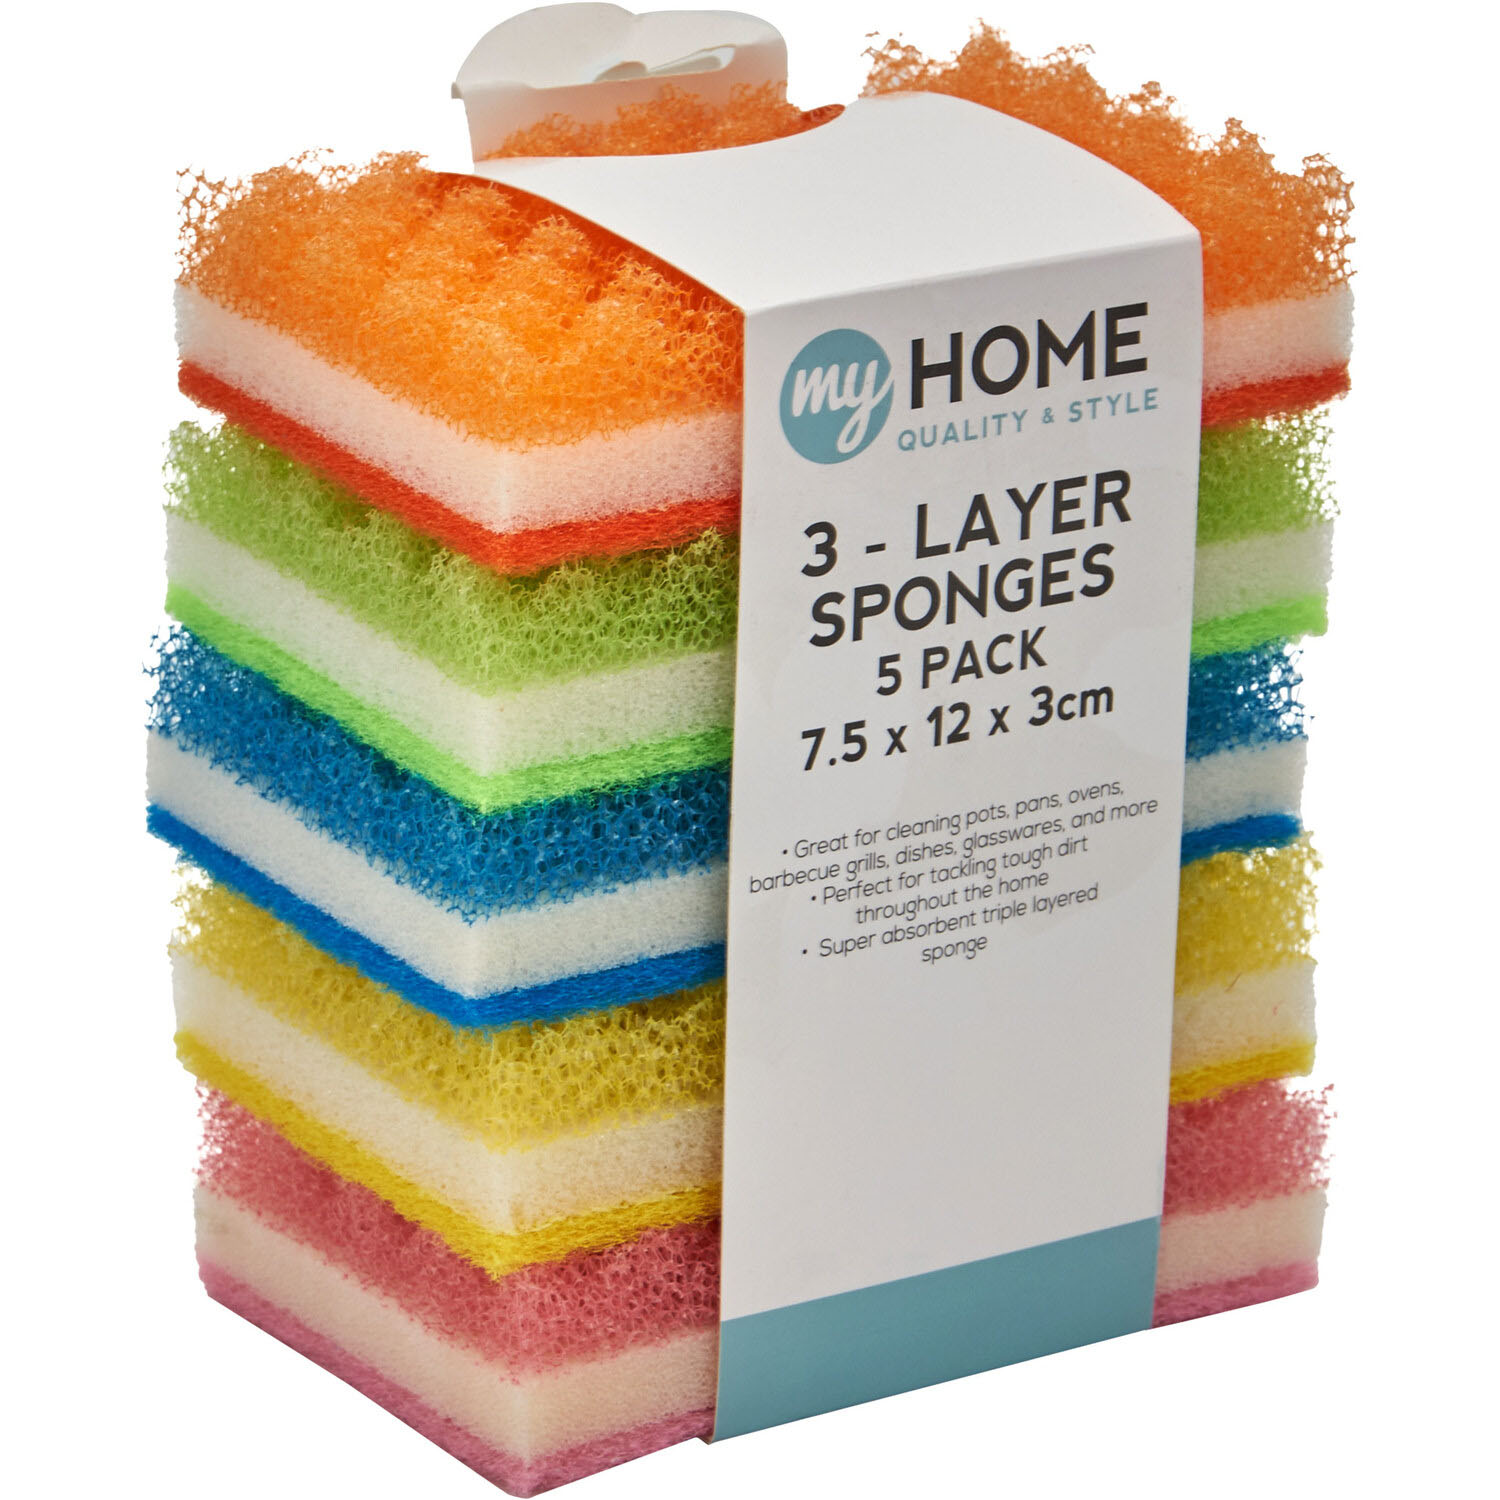 My Home 3 Layer Sponges 5 Pack Image 1